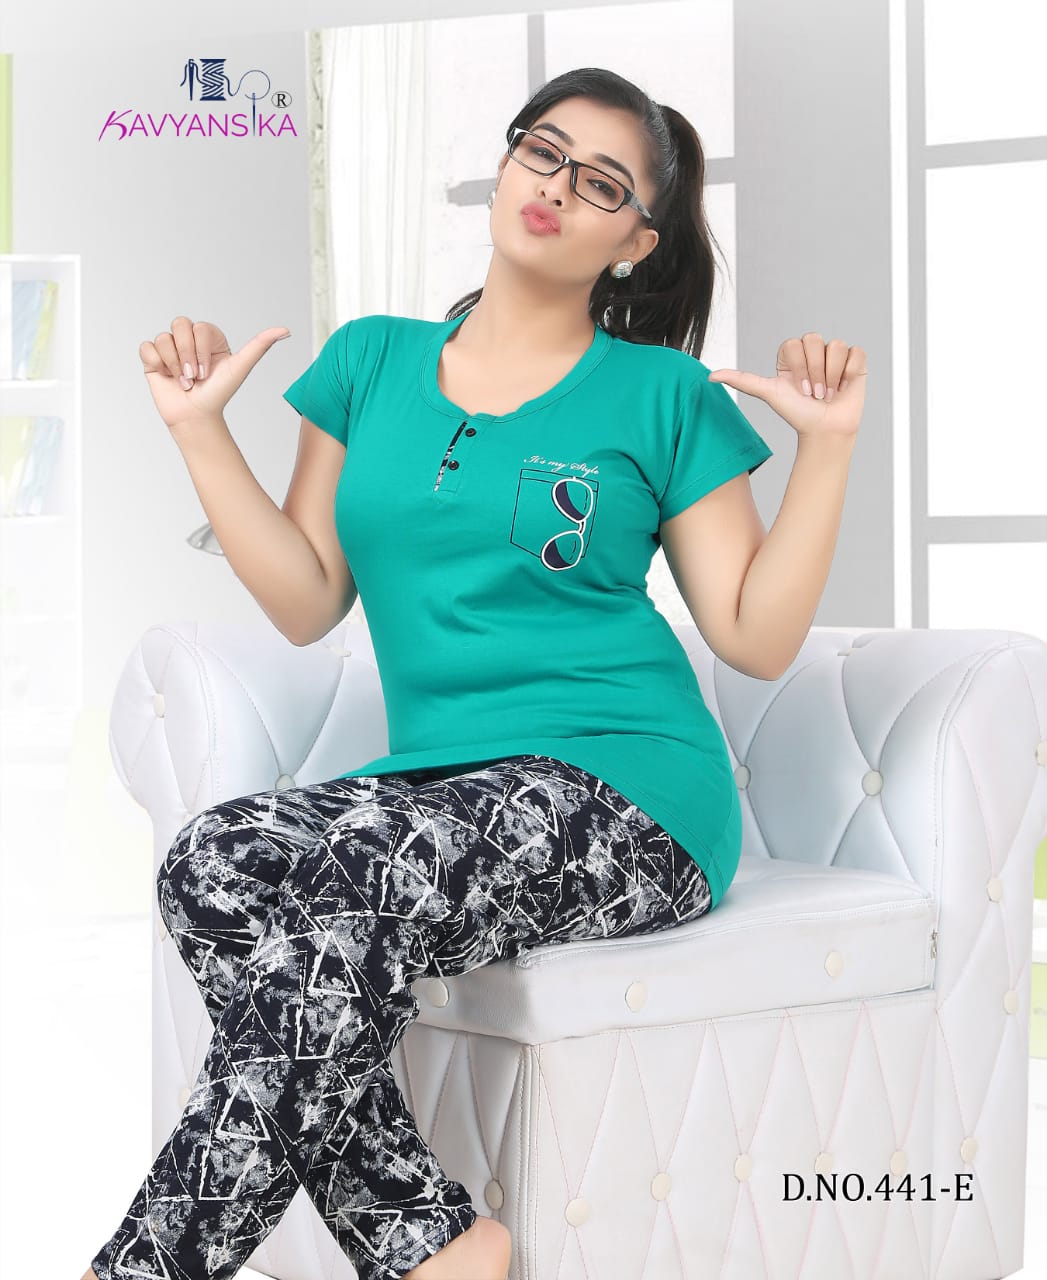 Kavyansika 441 Hosiery Tshirt And Pant Ladies Night Suit Collection